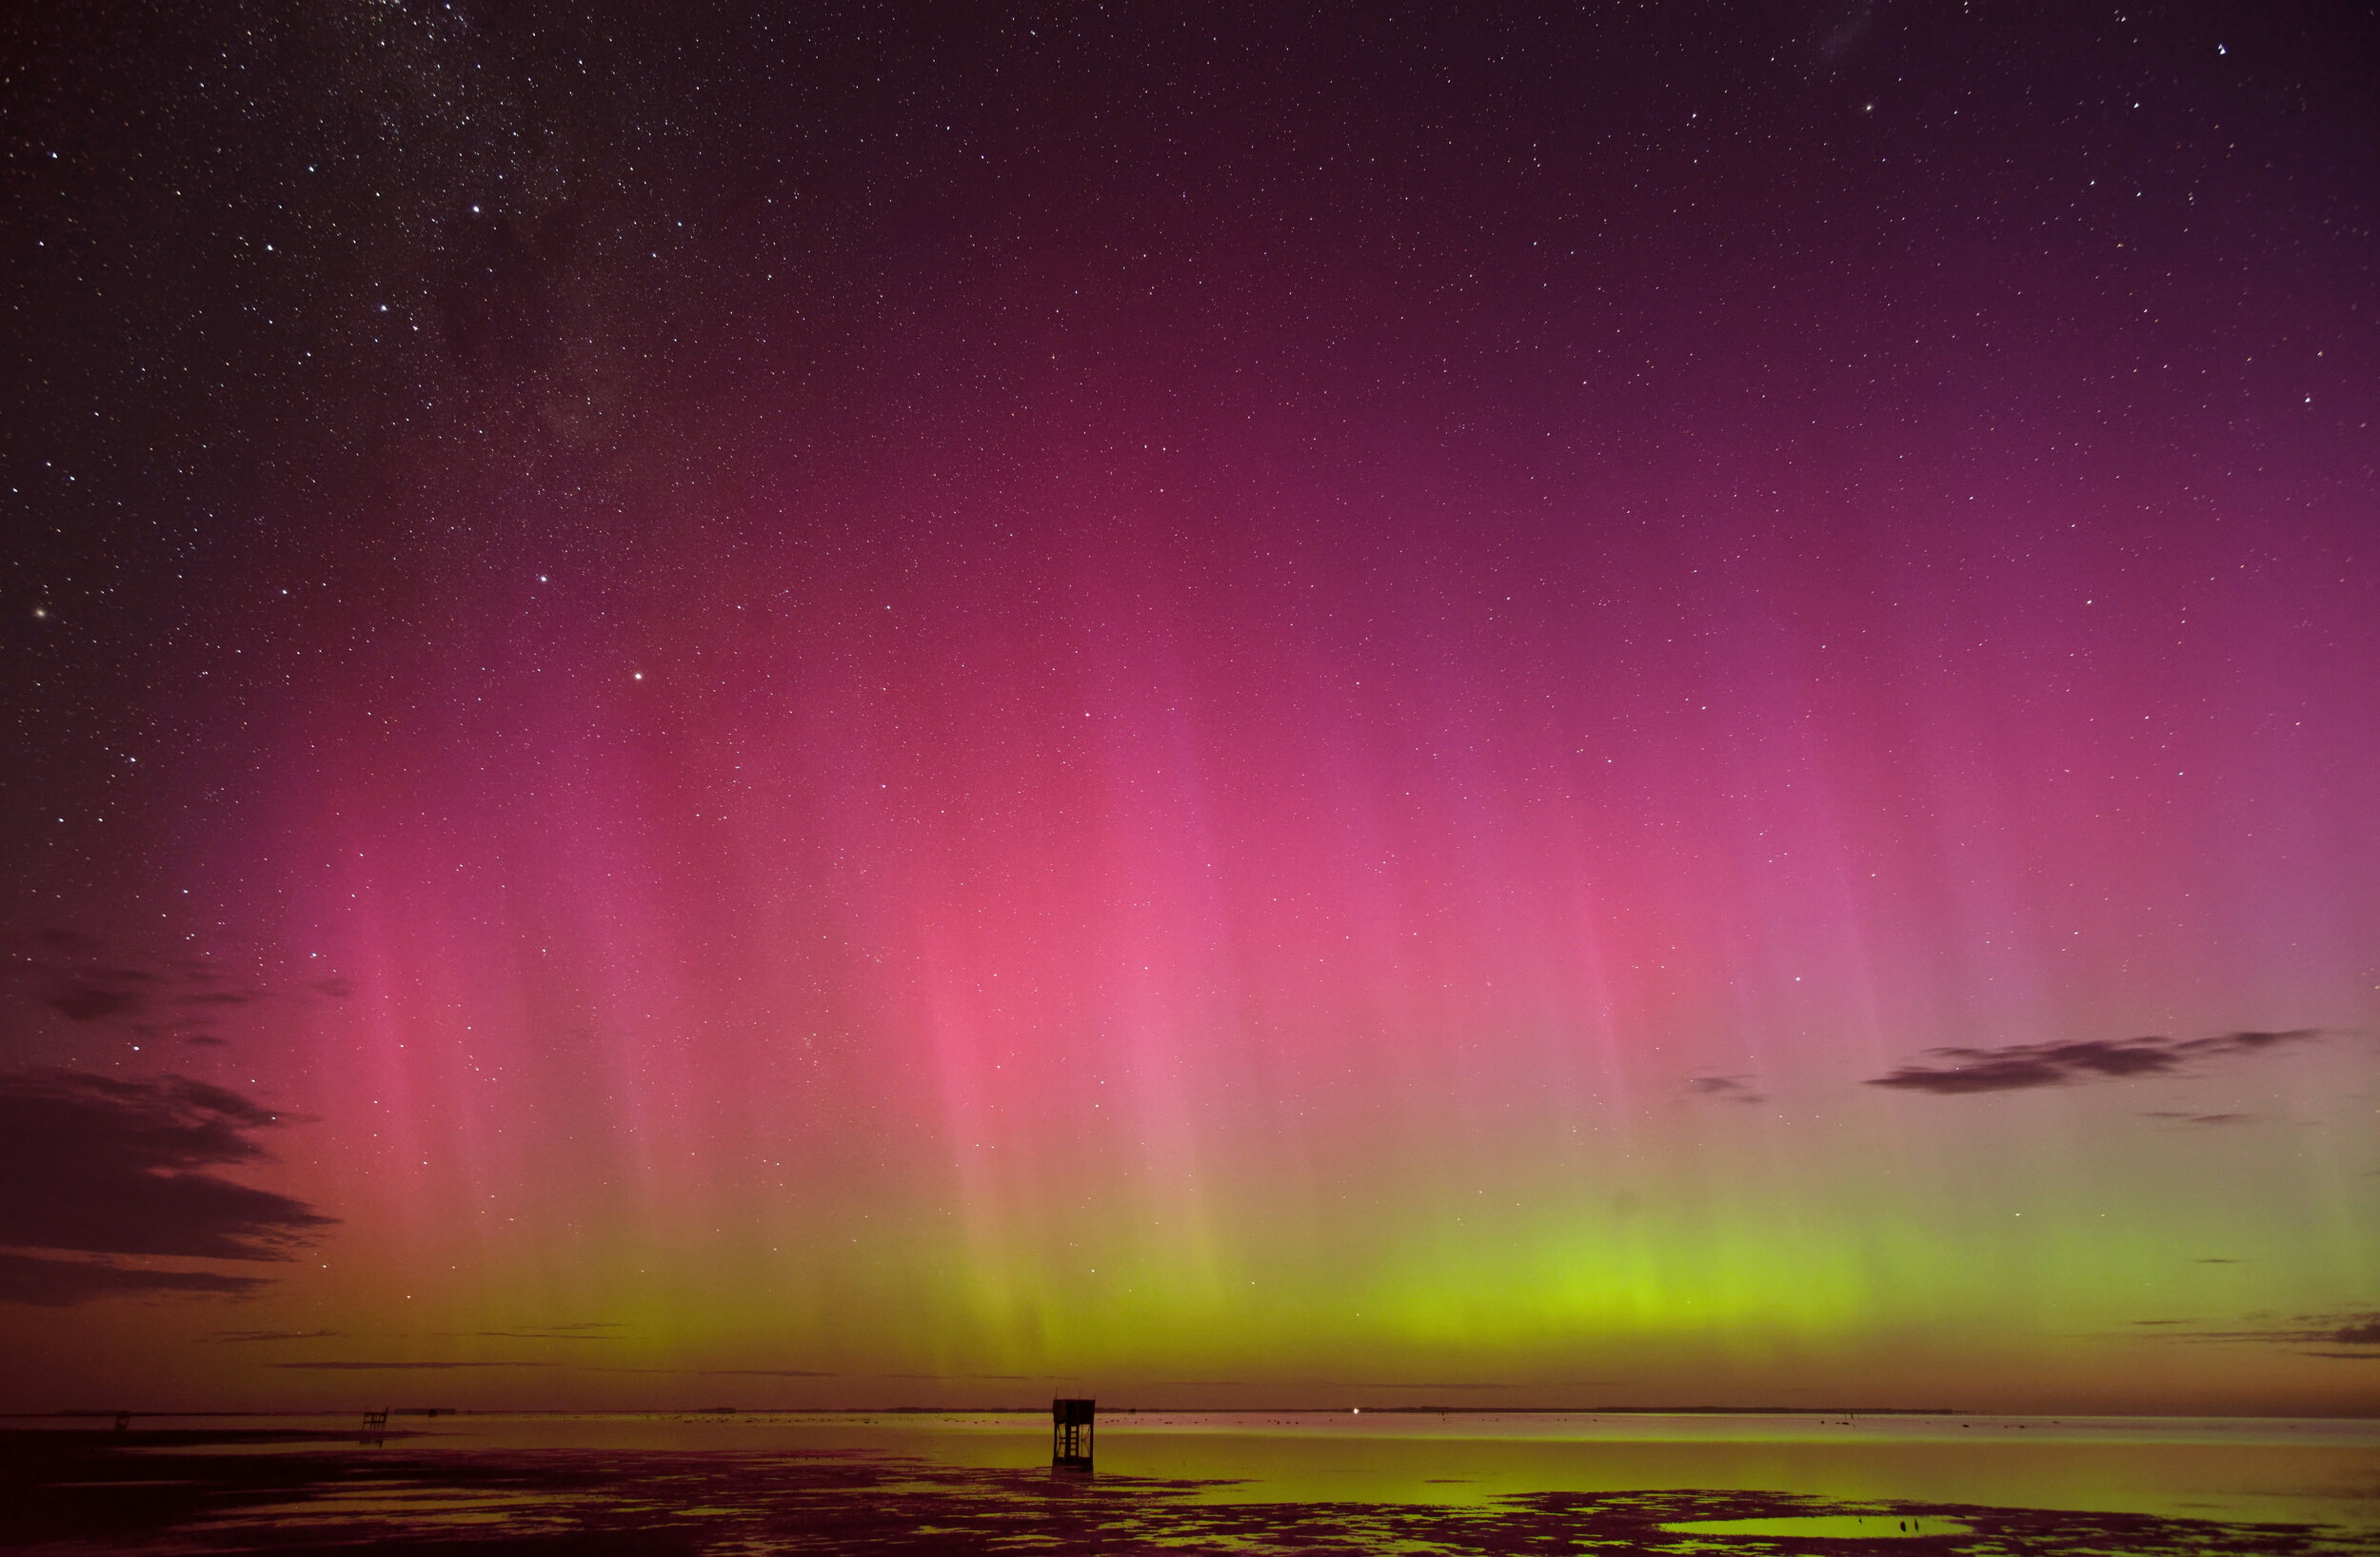 CATALYST Lost in the Dazzling Southern Lights of the Aurora Australis